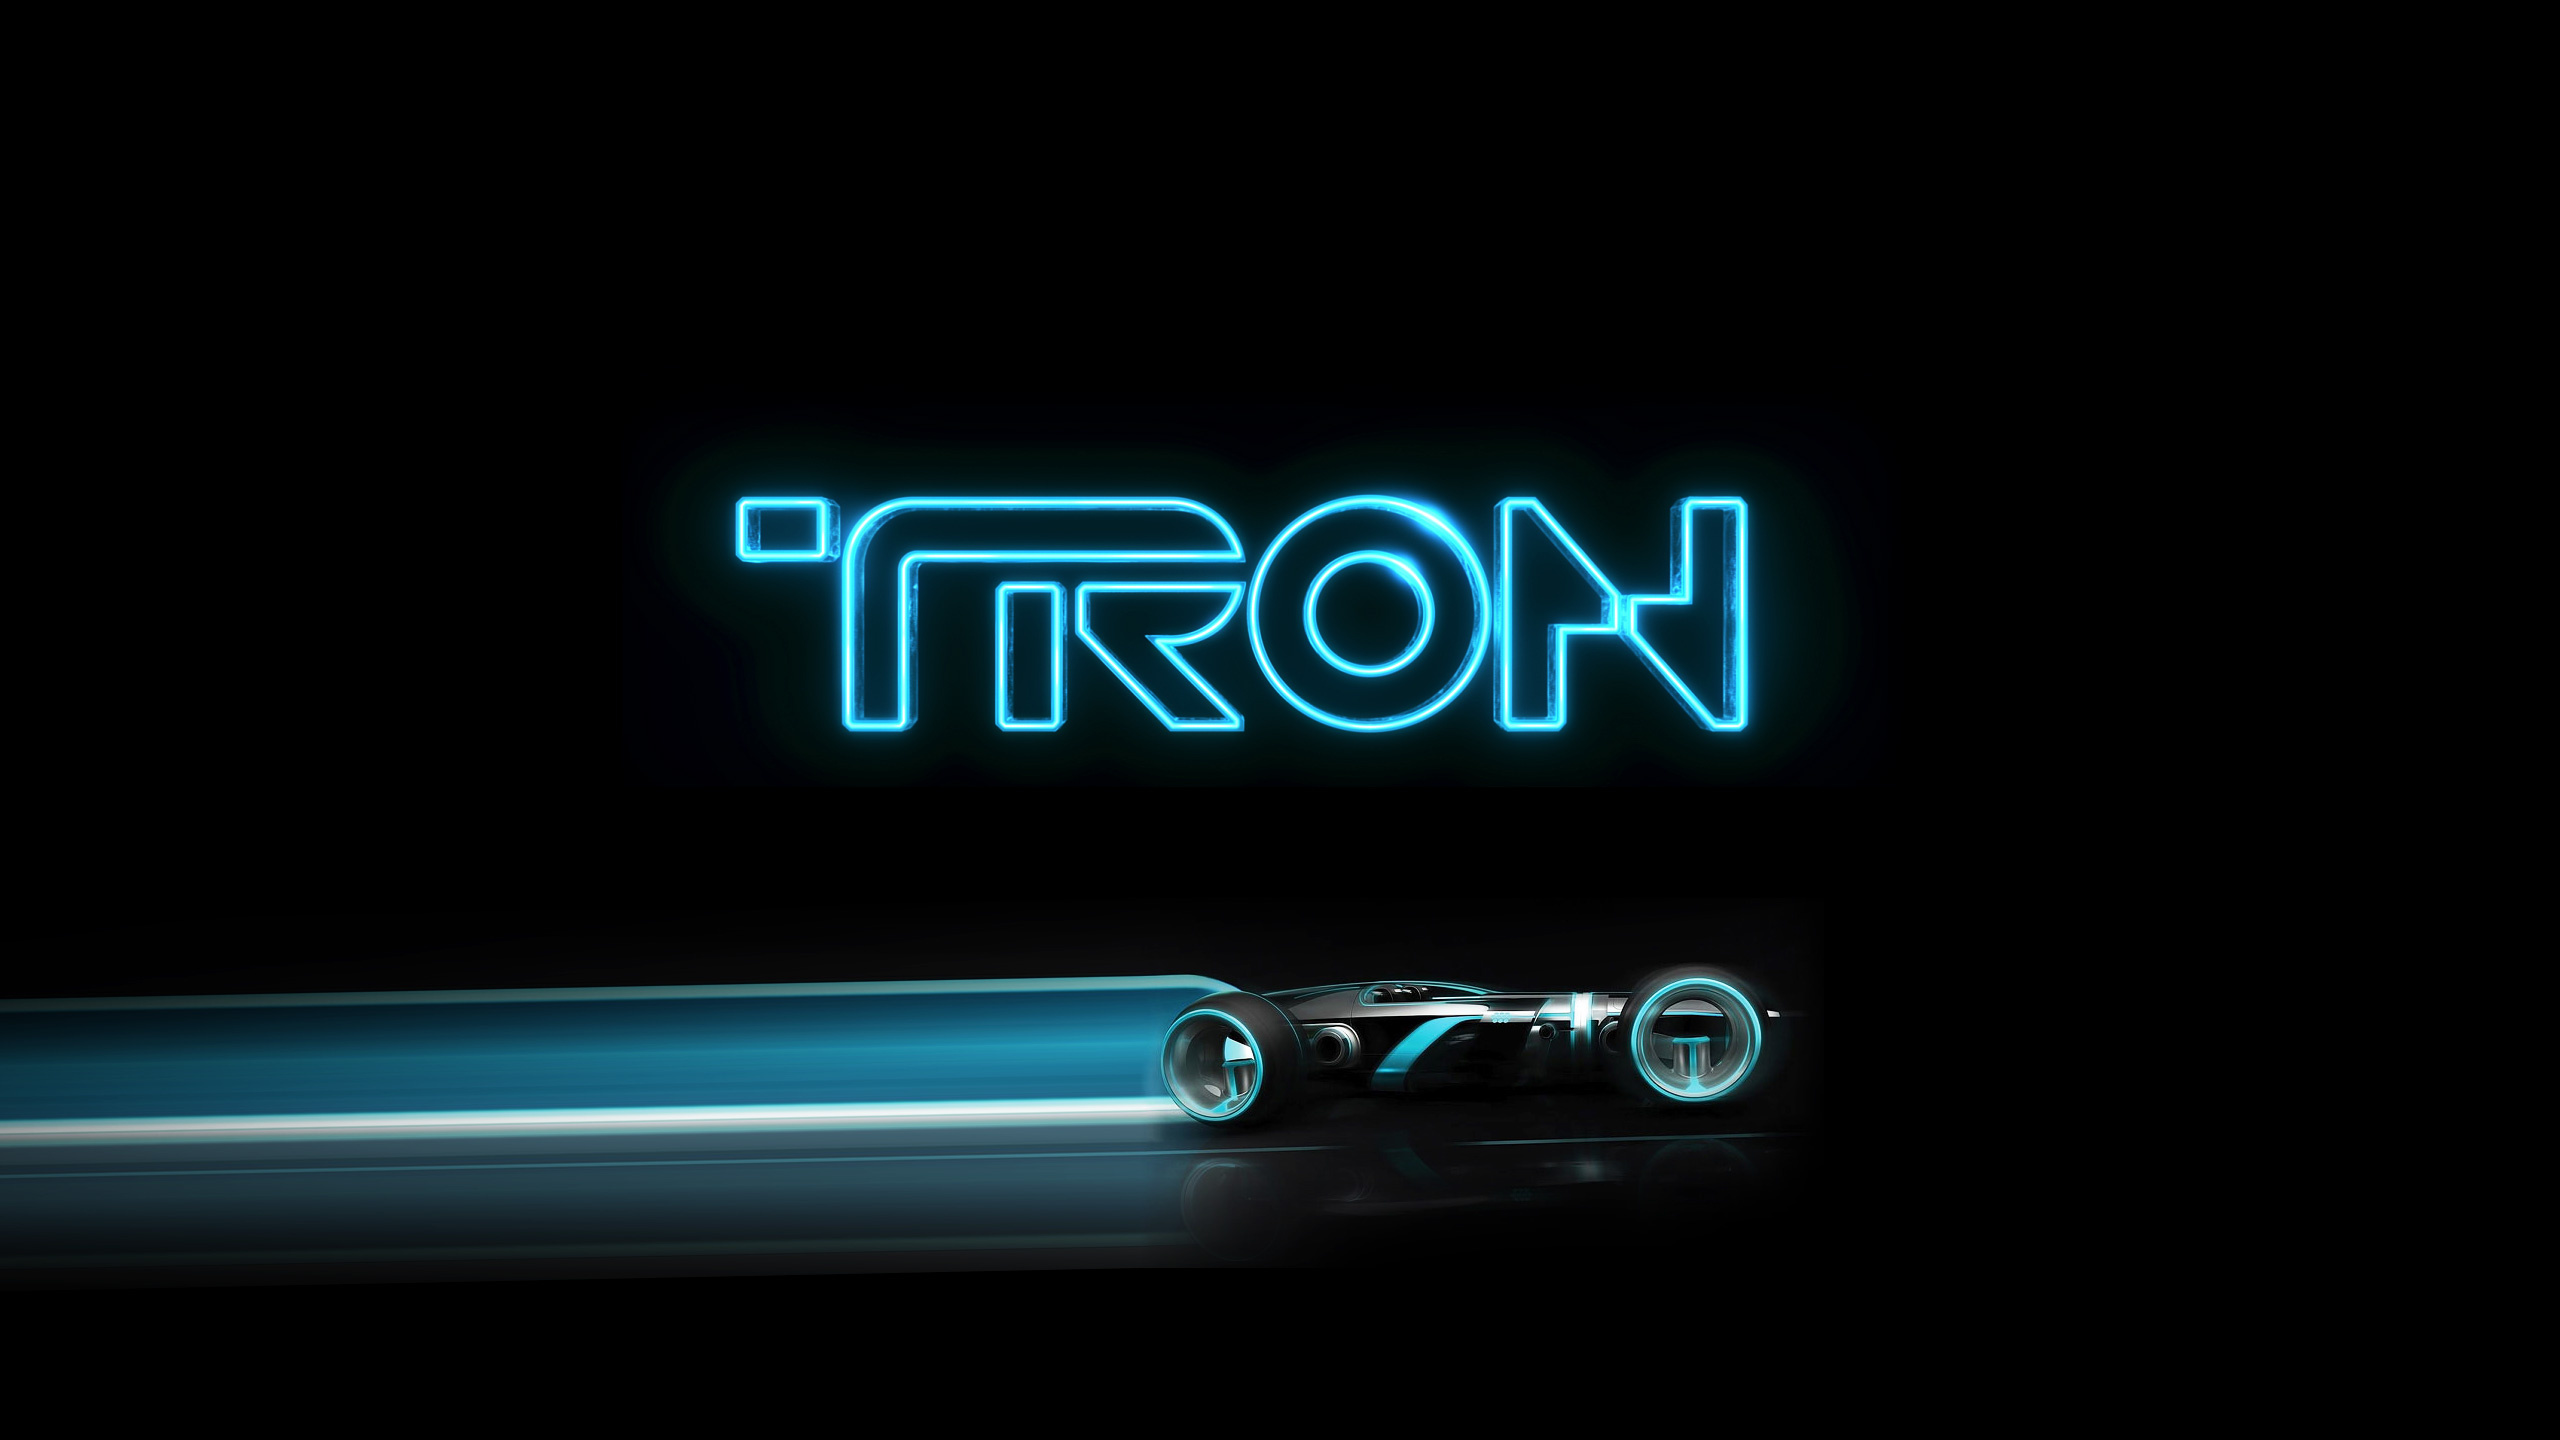 Tron (Movie): The film was nominated for Best Sound Editing at the 83rd Academy Awards. 2560x1440 HD Wallpaper.